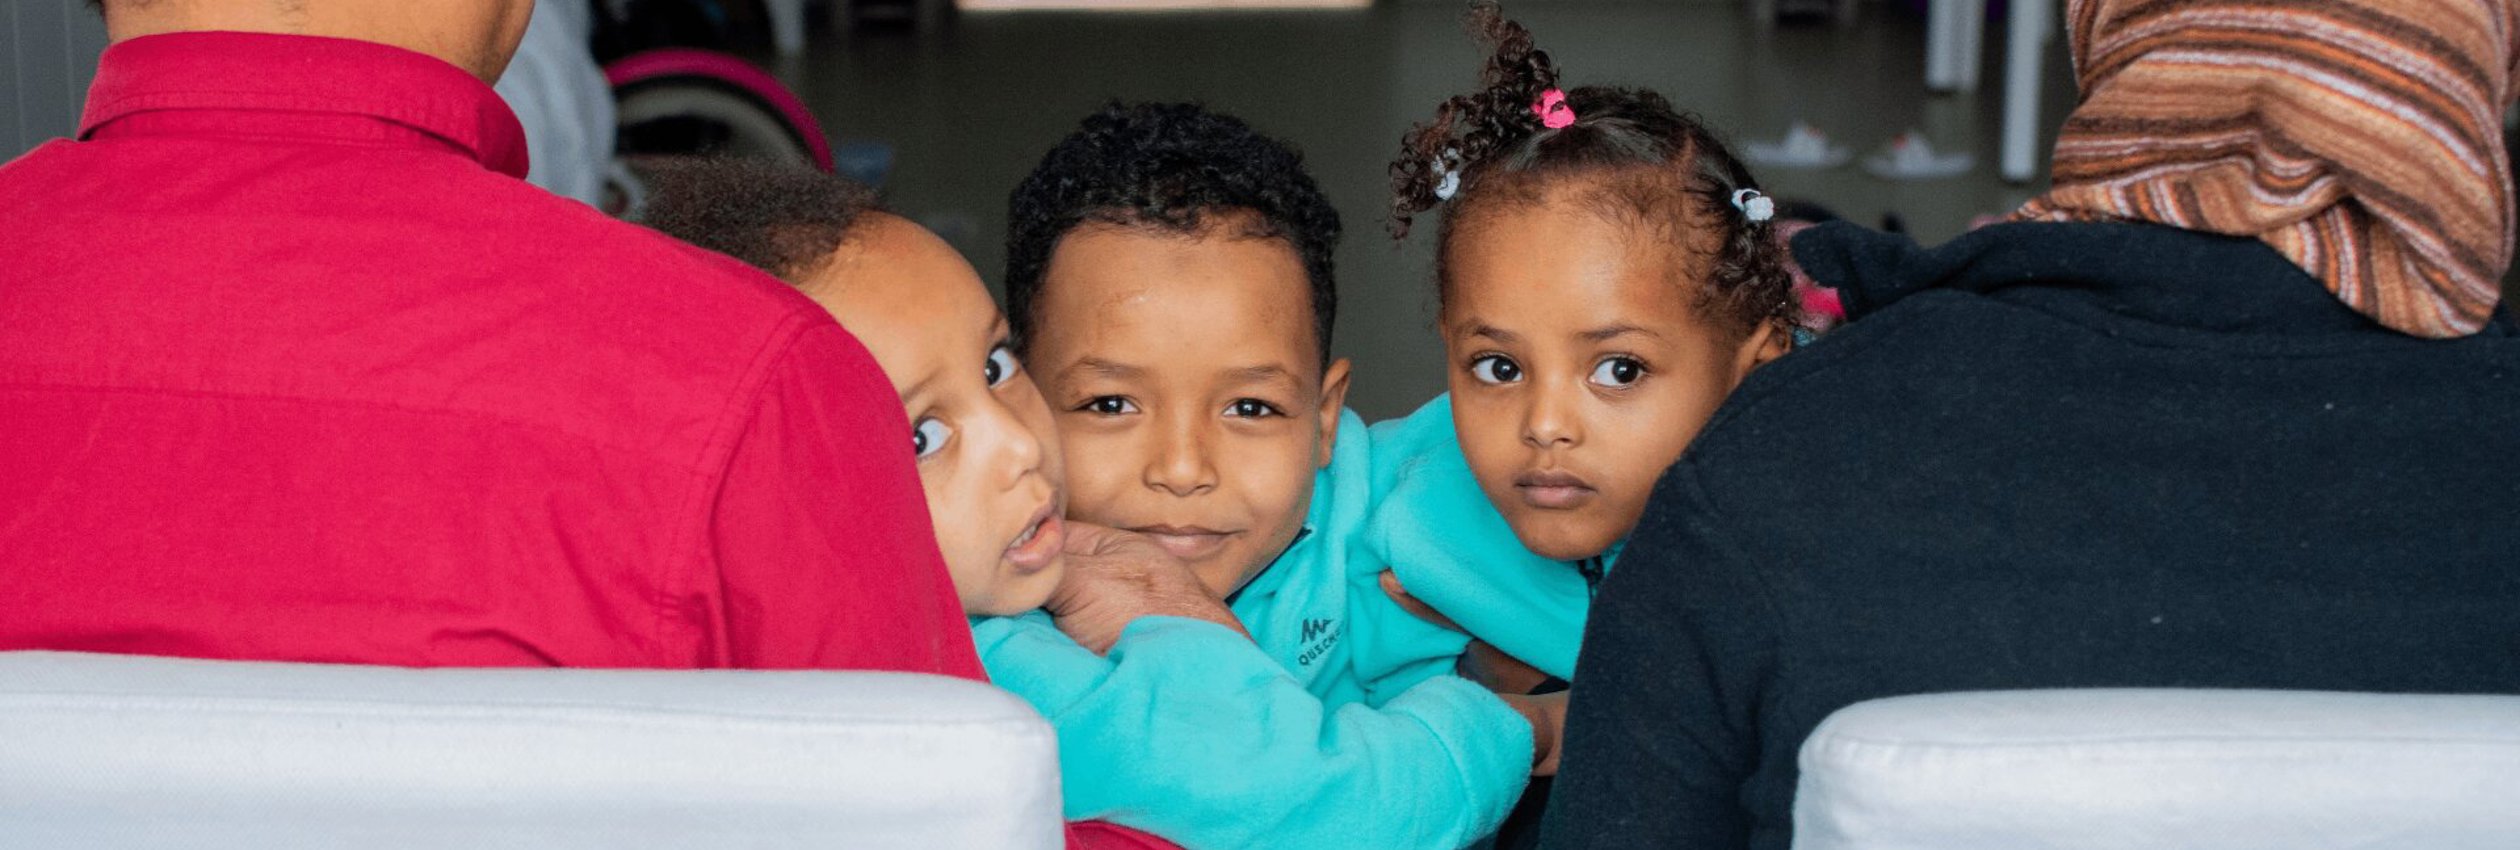 Three Eritrean children peek at the camera from their parents' laps